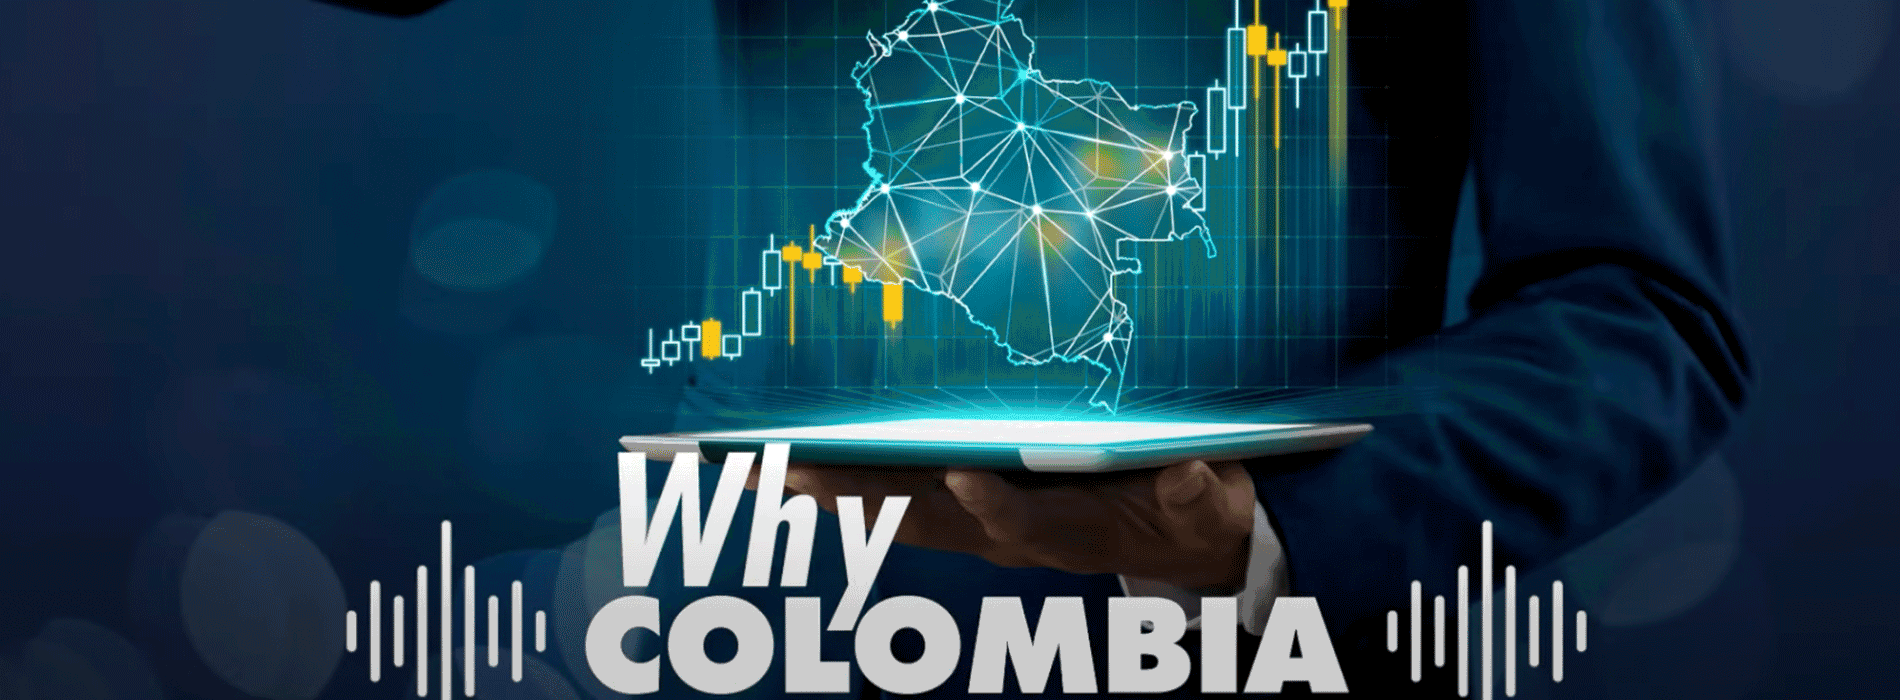 Have you listened to our Investment Podcasts series Why Colombia?